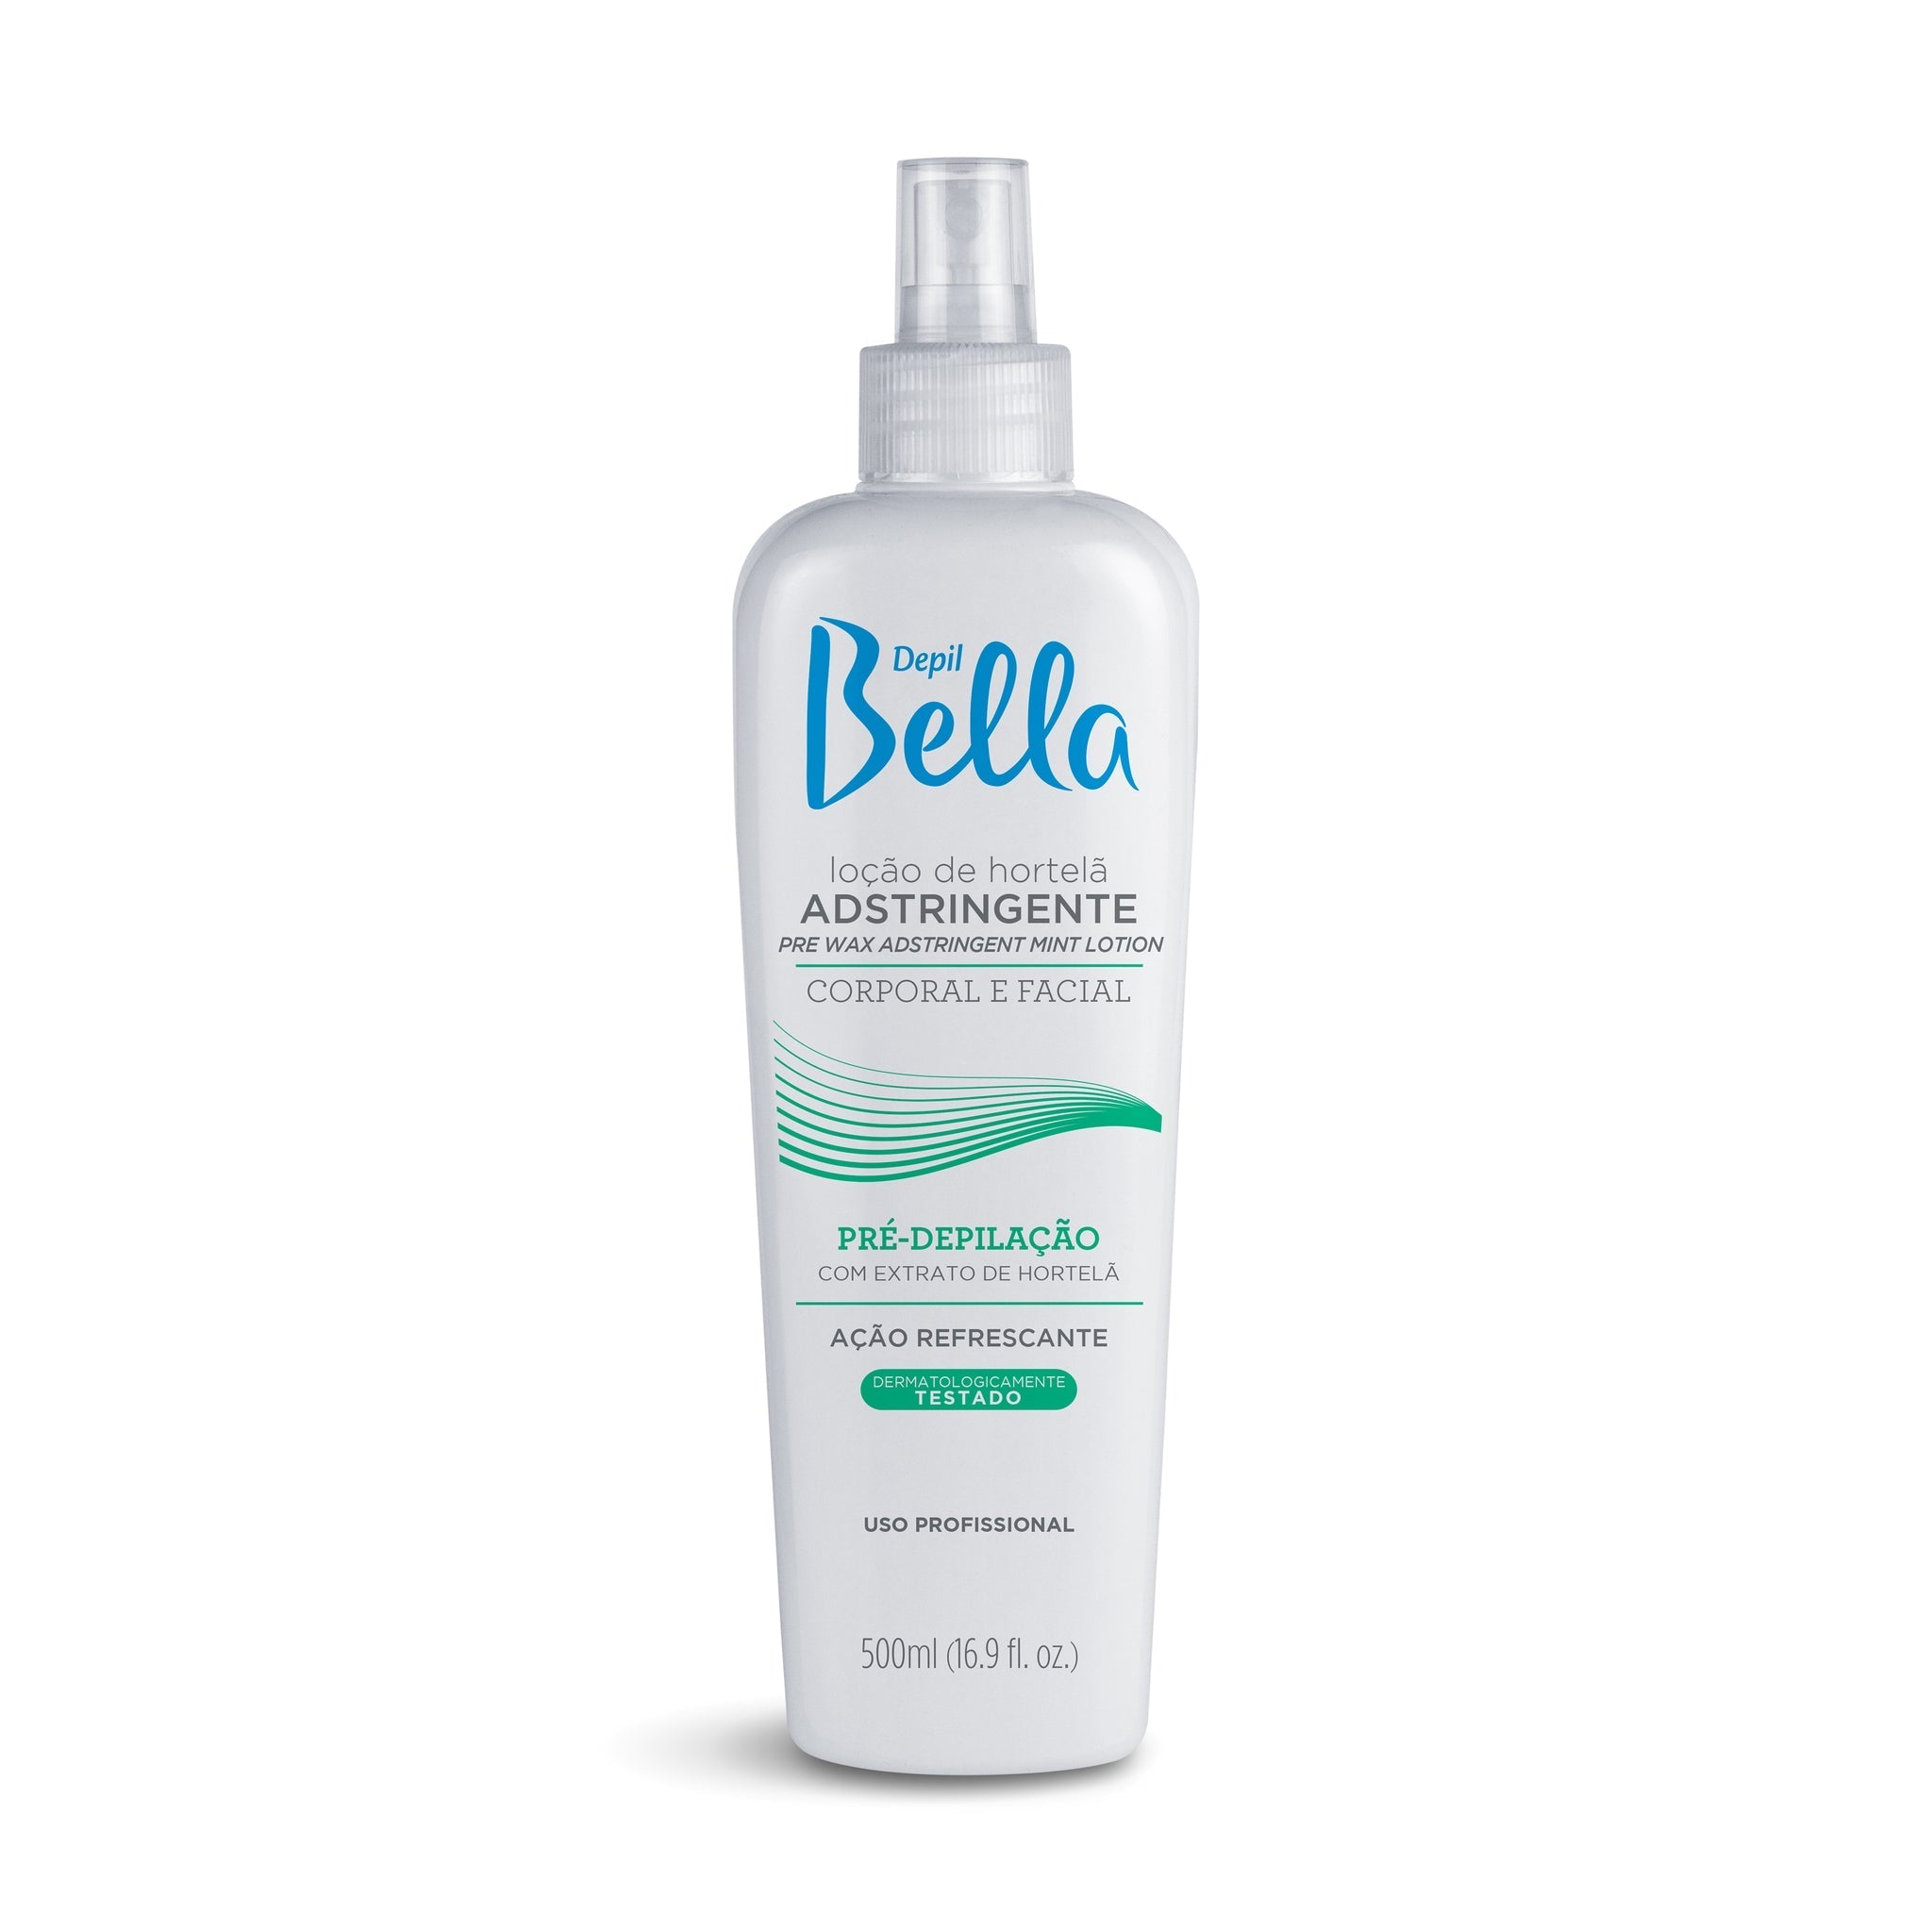 Depil Bella Skin Care Kit Kit Depil Bella, 1 unit Post Waxing Oil Remover and 1 unit Pre Waxing Astringent.